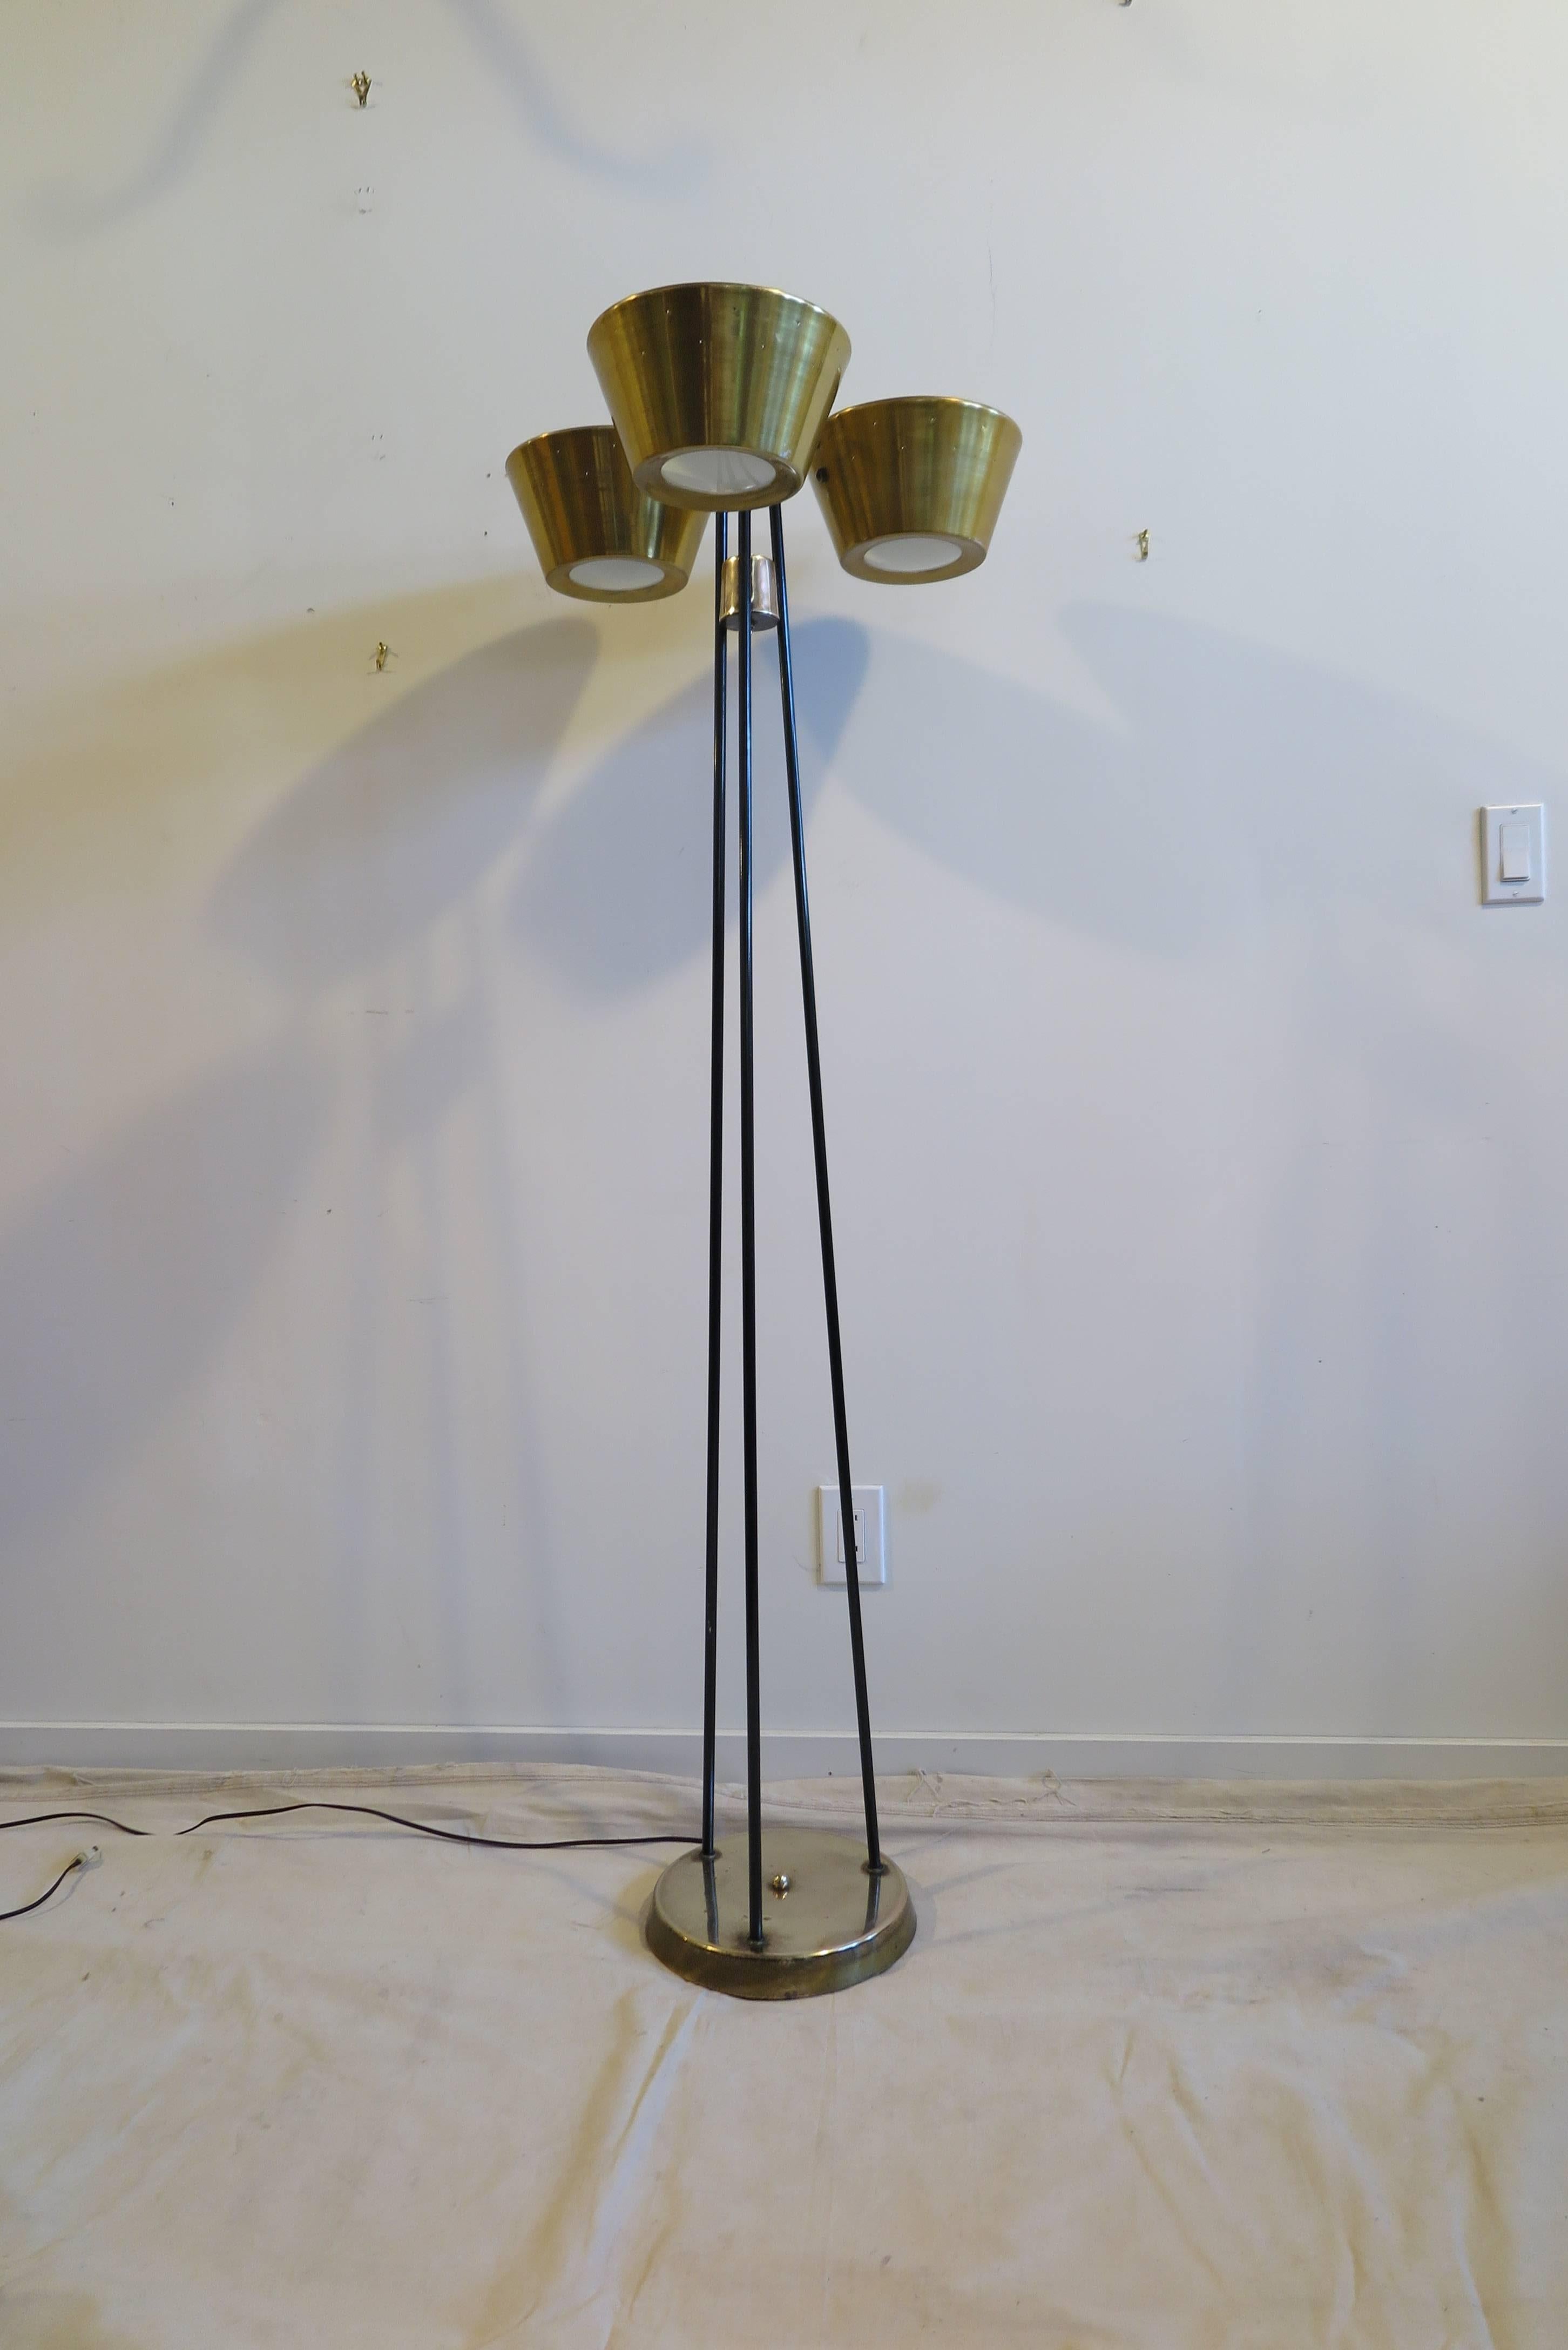 A Gerald Thurston pierced three-light floor lamp touchier for Lightolier. Steel, brass and aluminum floor lamp. Having both downward and upward lighting using a three-way switch that turns 1 on 2 on 3 on 4 off. Very good original condition, with